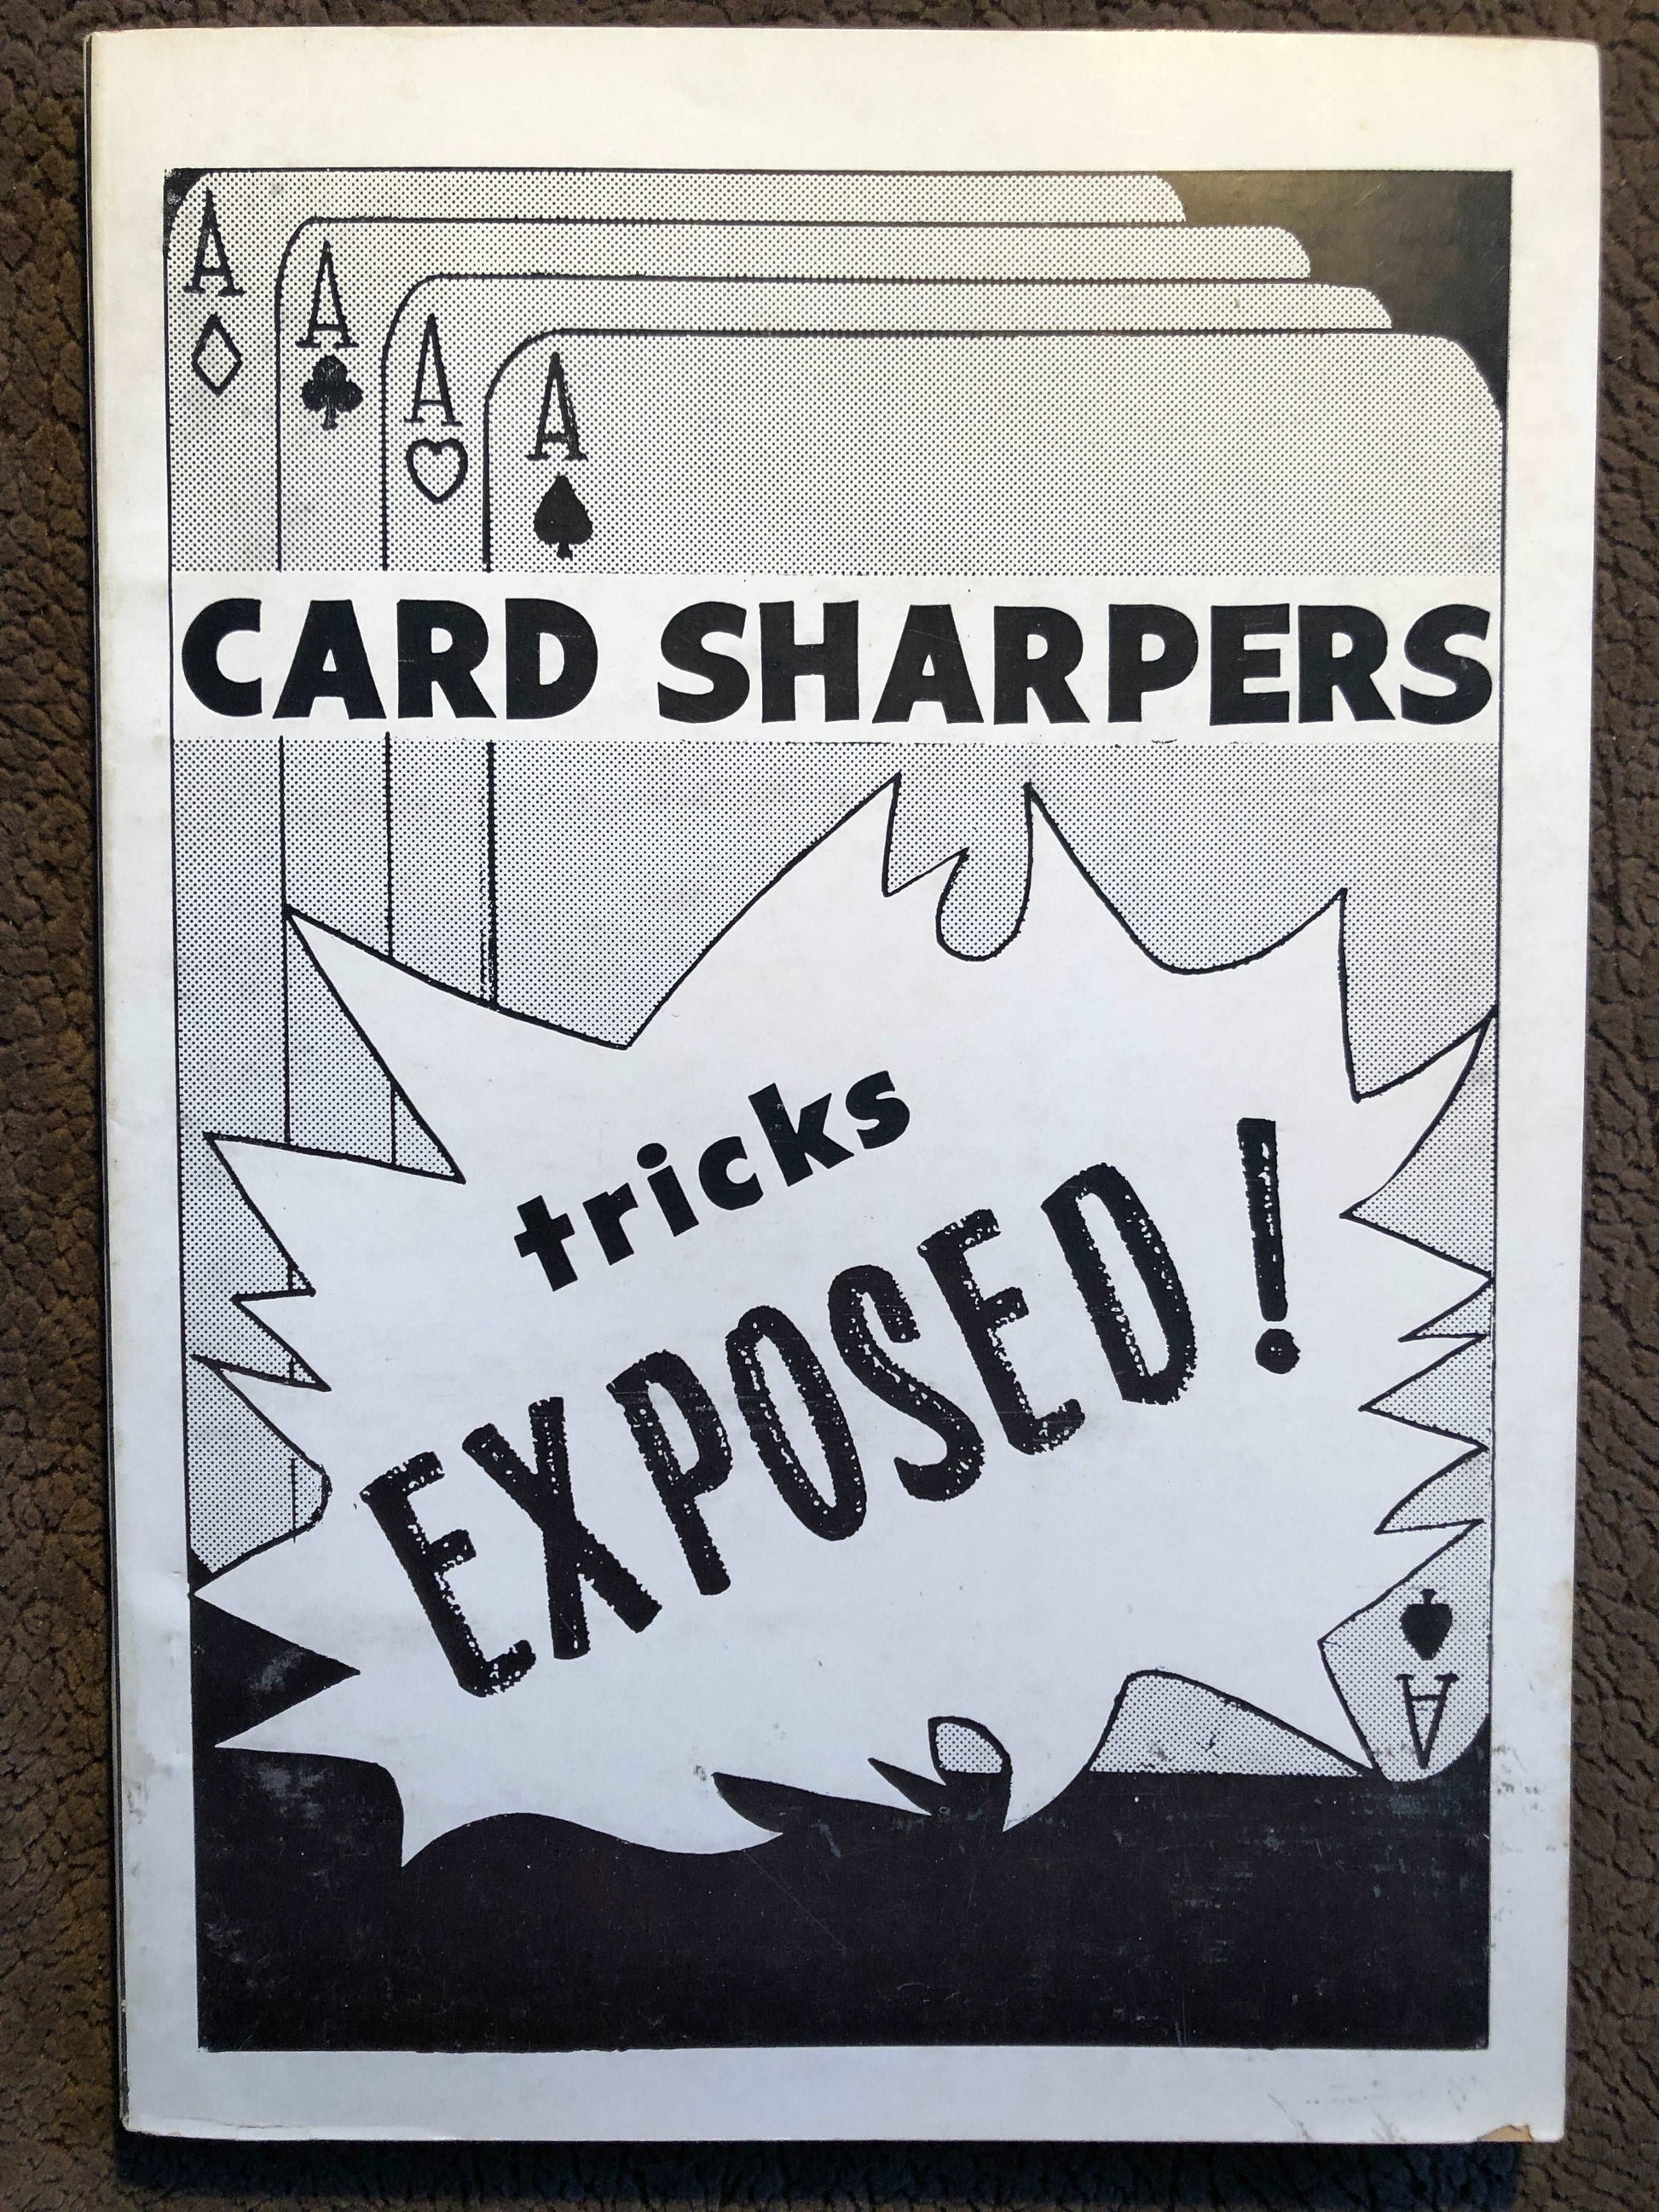 Card Sharpers Tricks Exposed - Canfield